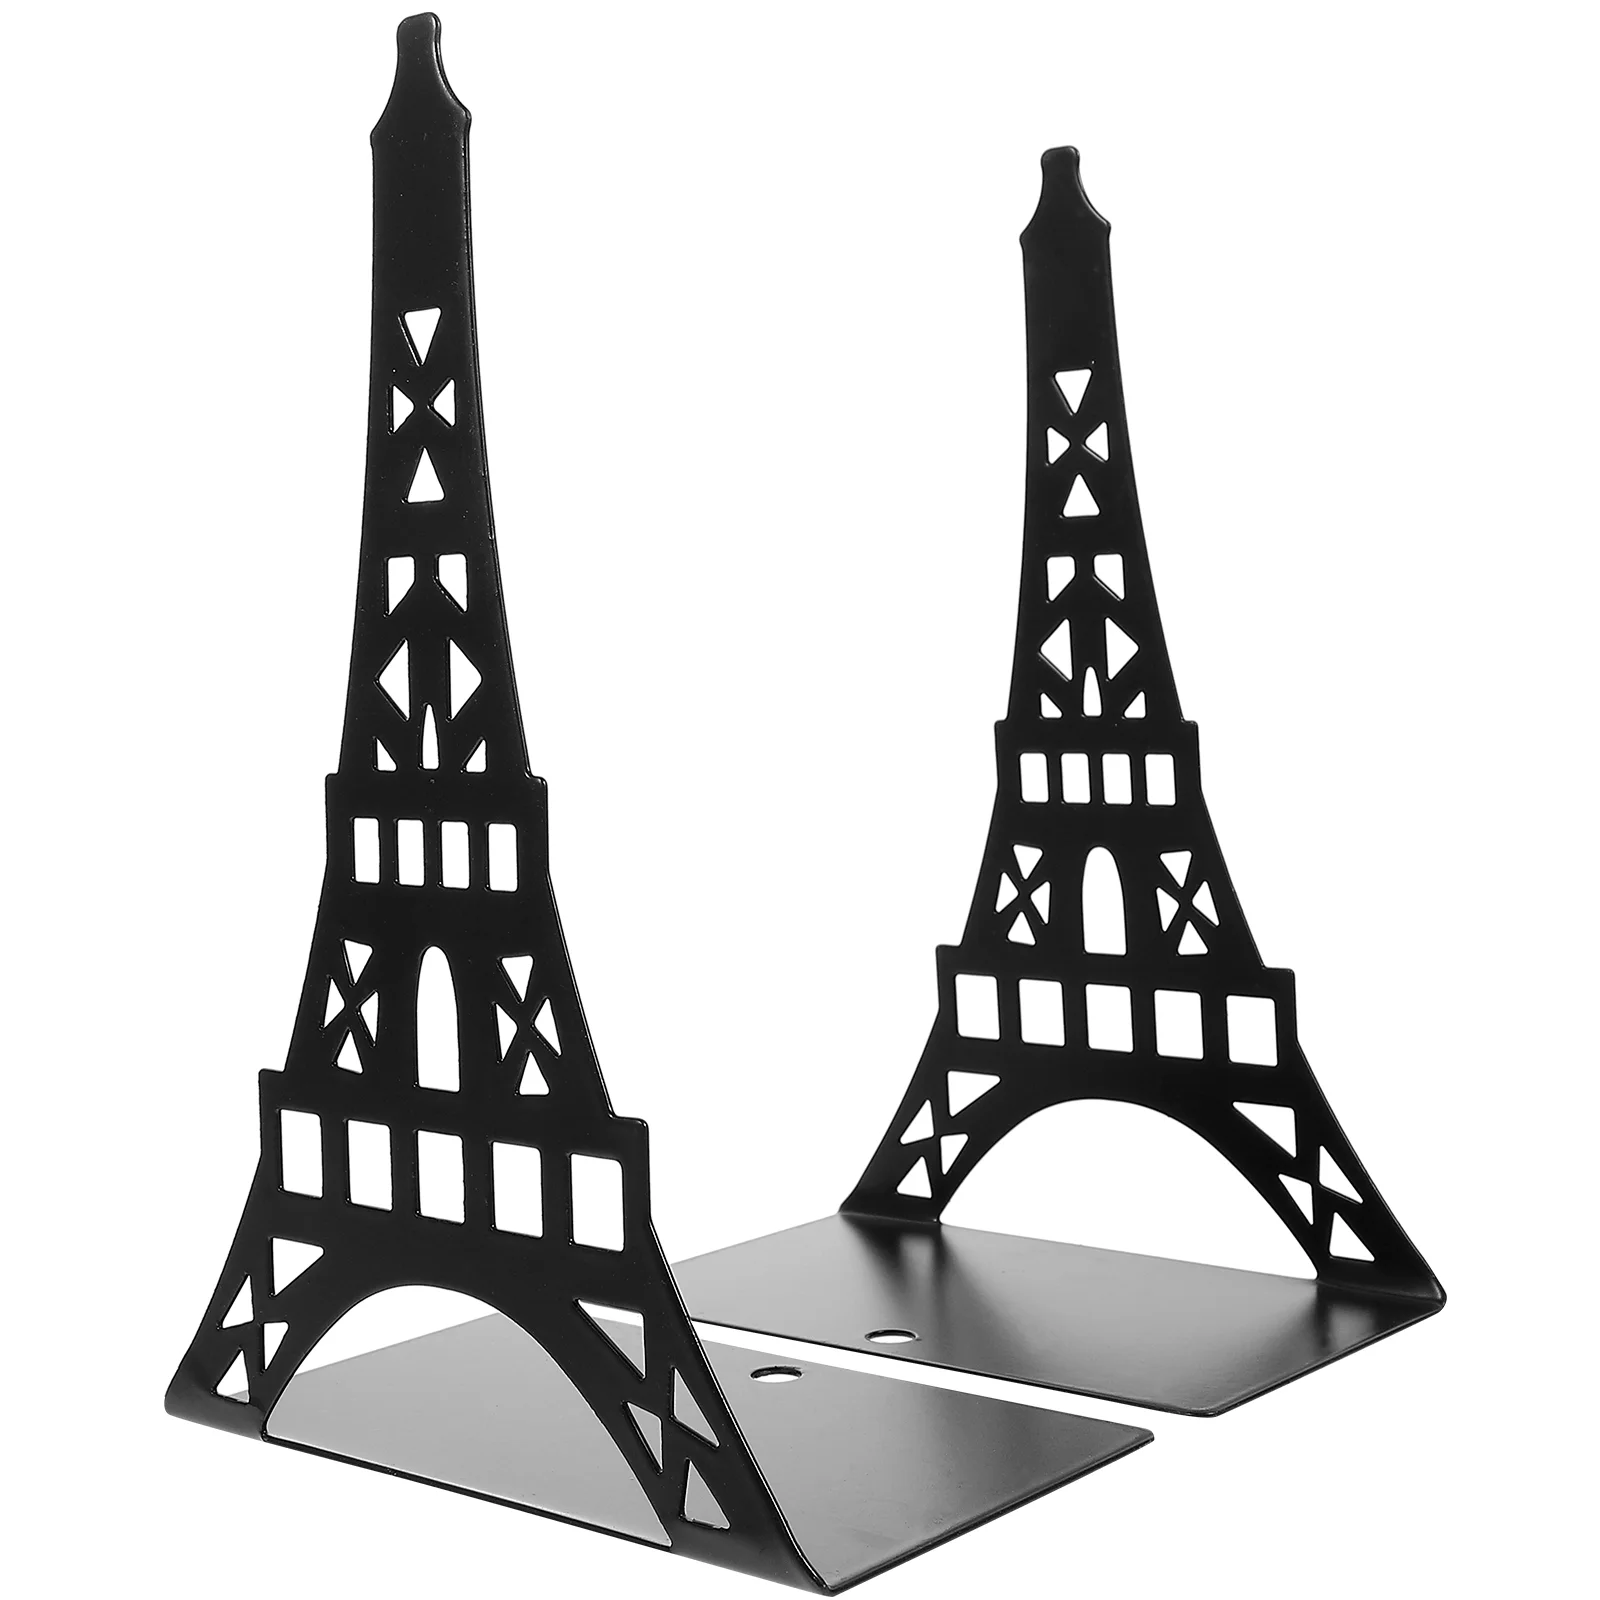 

2 Pcs Bookend Crafted Organizer Reusable Holders Shelves Kids Room Decor Tower Shape Ends Iron Bookends Reading